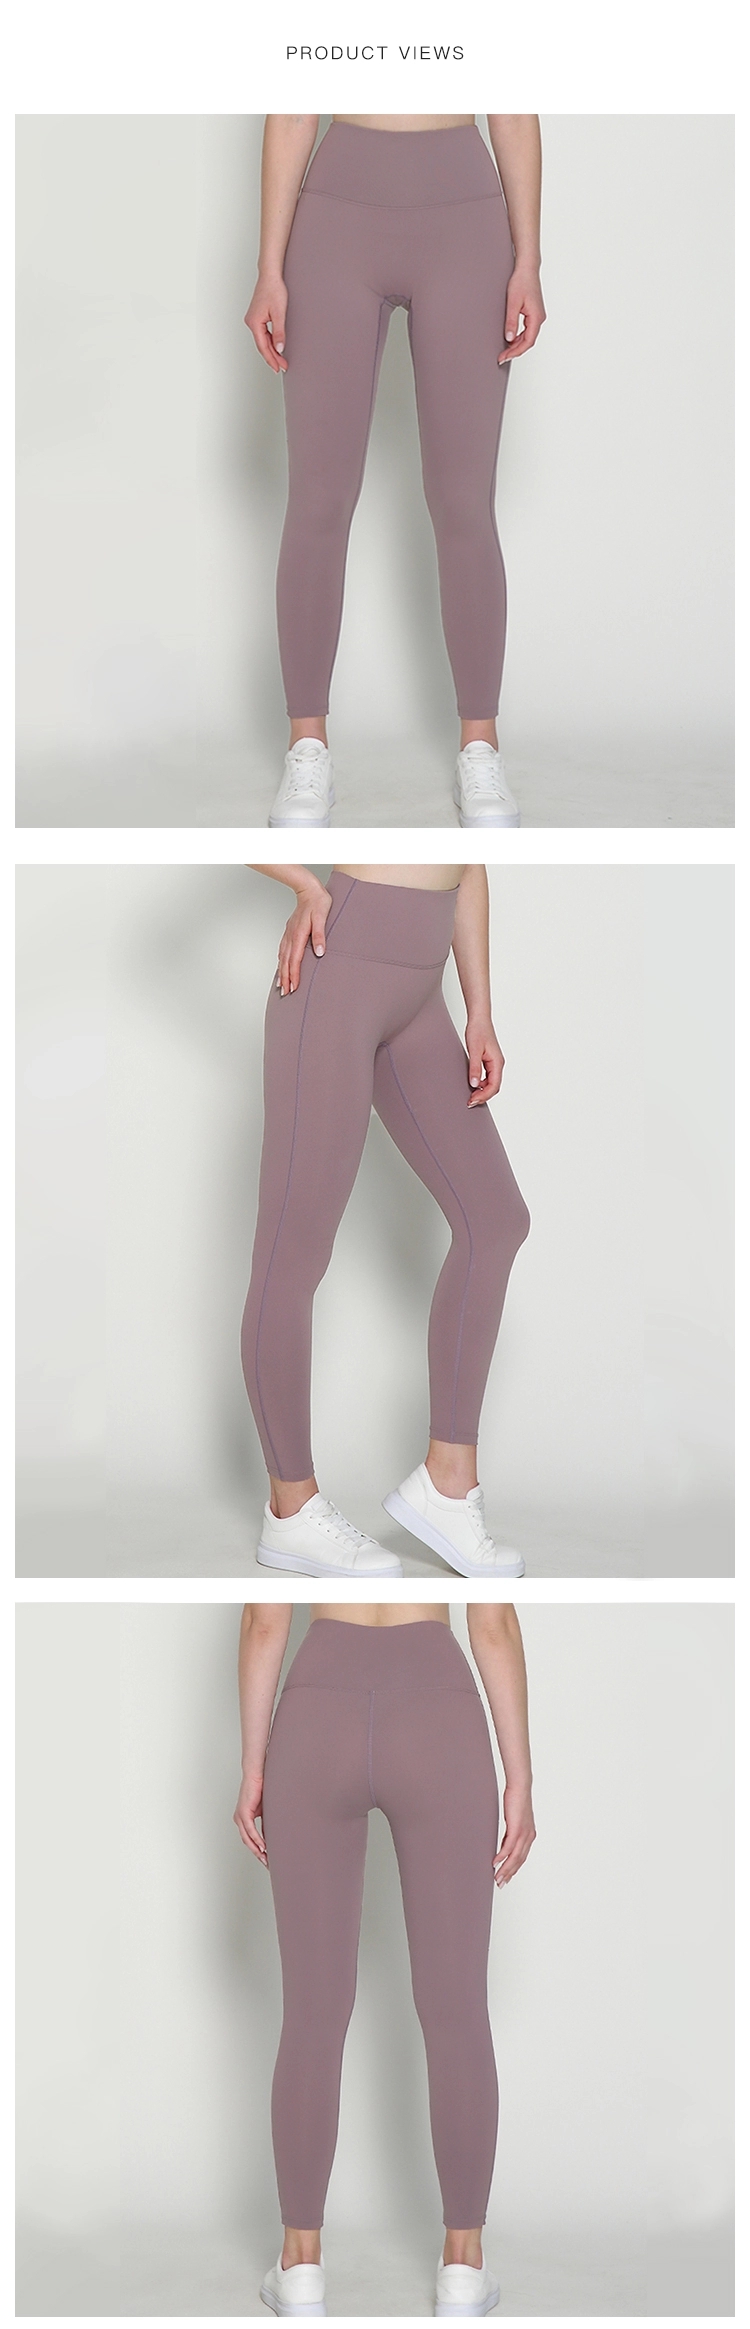 Buy Soft Yoga Leggings Seamless Solid Color High Elastic Sportswear No  Camel Toe Spandex Tight Workout Leggings For Ladies from Shantou Yili  Hengfeng Weaving Co., Ltd., China